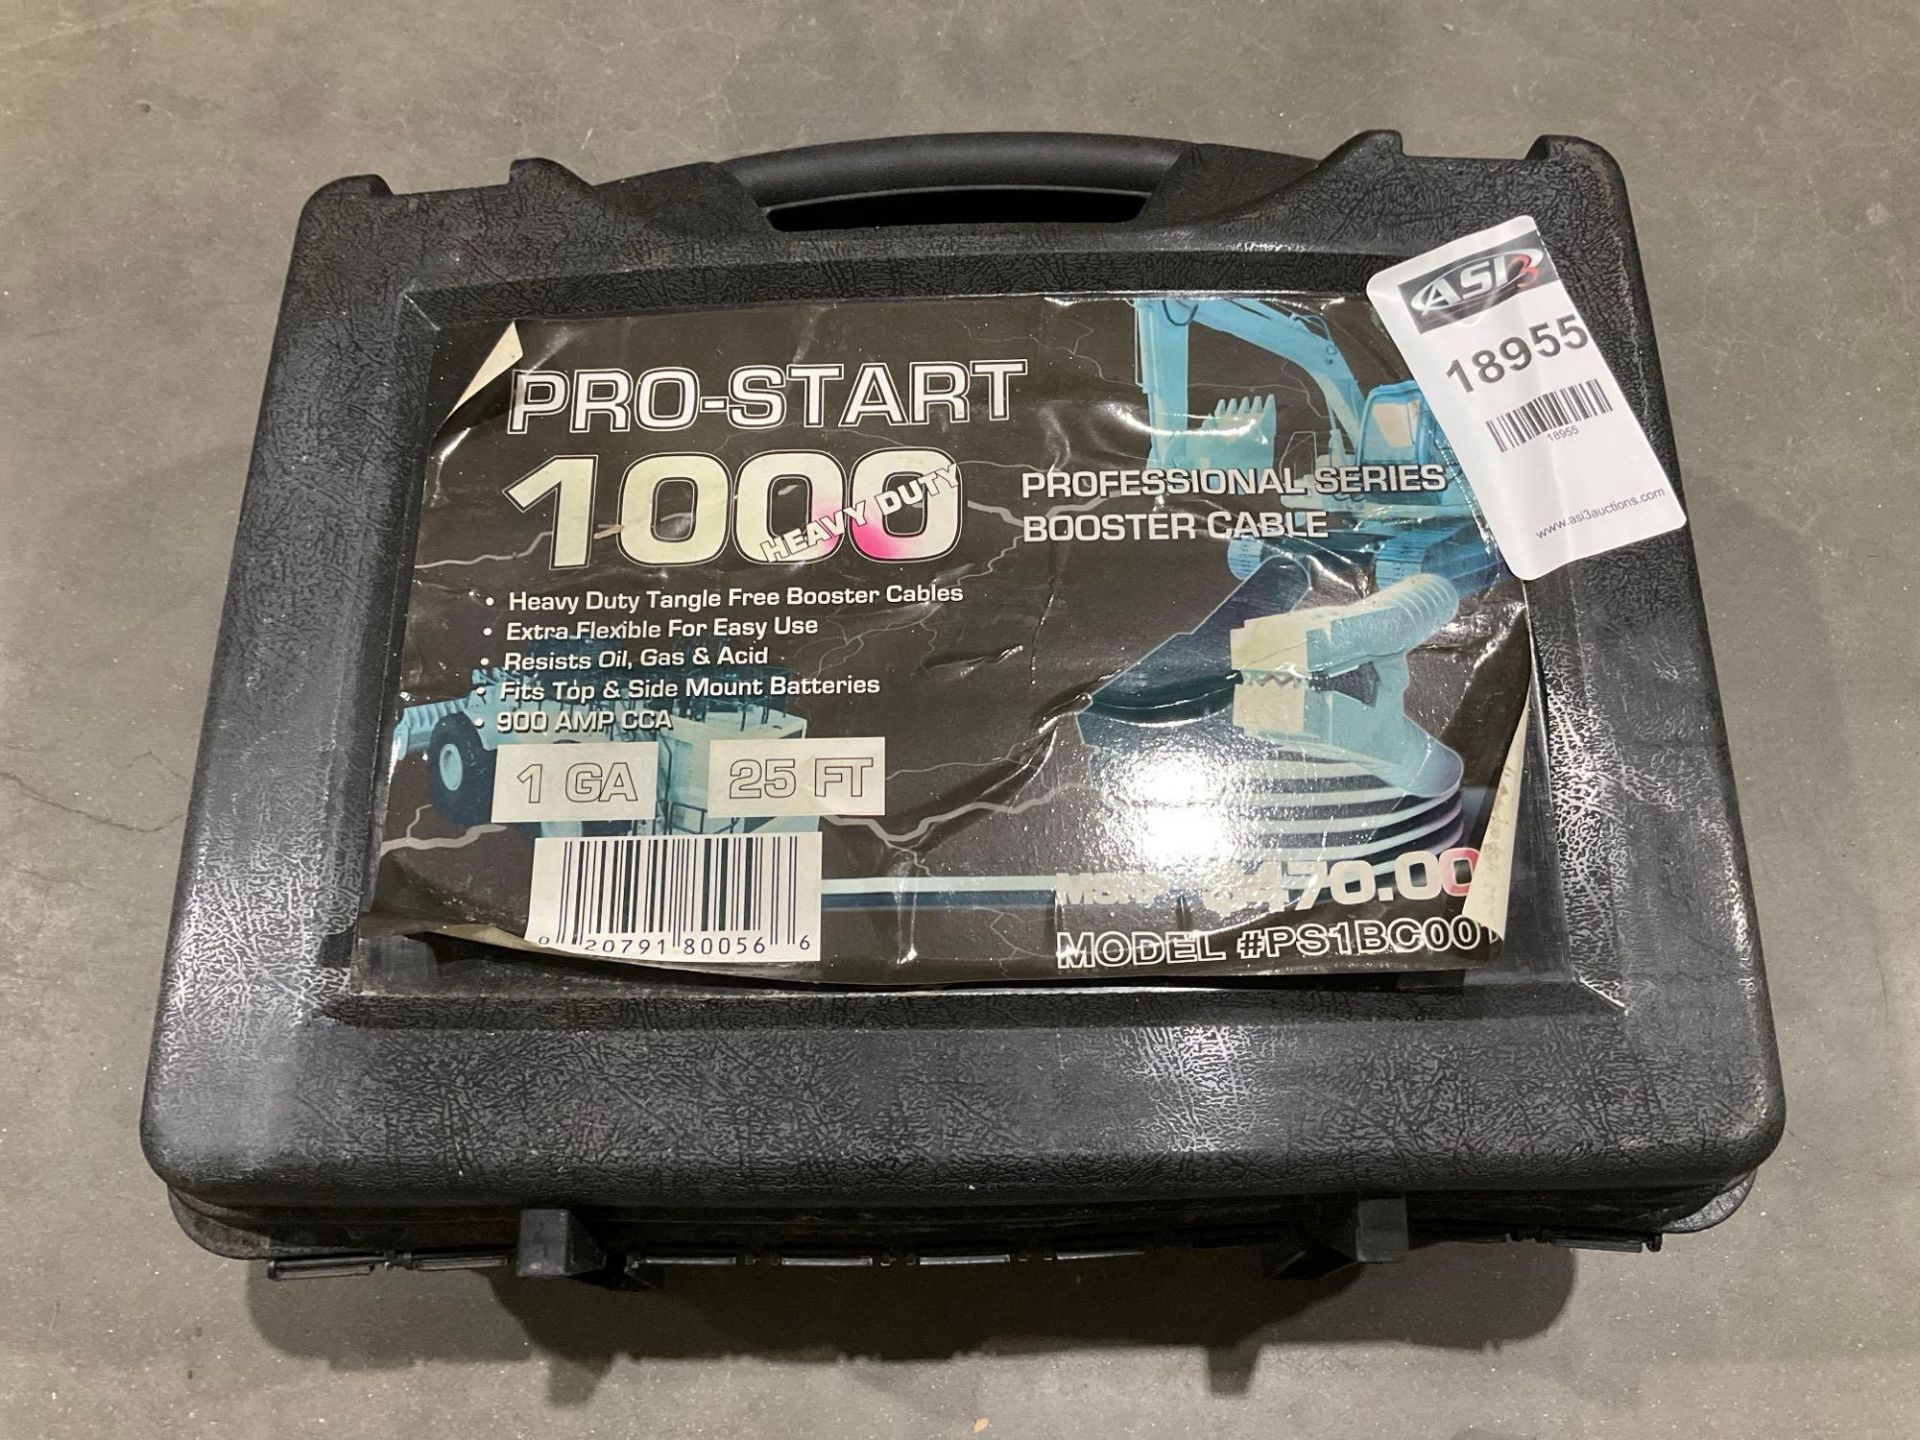 UNUSED PRO START 1000 HEAVY DUTY PROFESSIONAL SERIES BOOSTER CABLE, 1 GA, 25FT, 900 AMP CCA